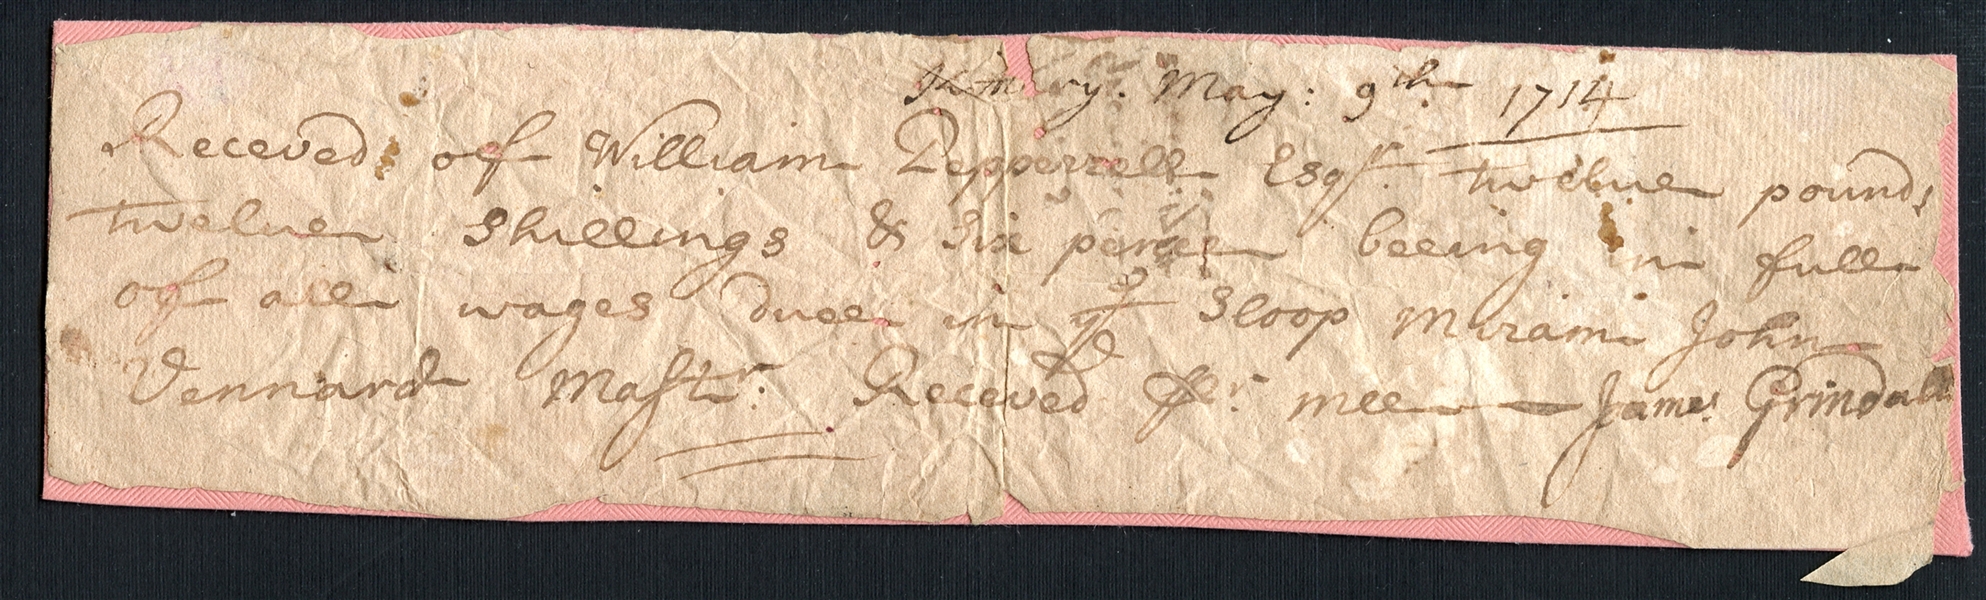 1714 Wage Receipt From William Pepperrell Signed by James Grindal 